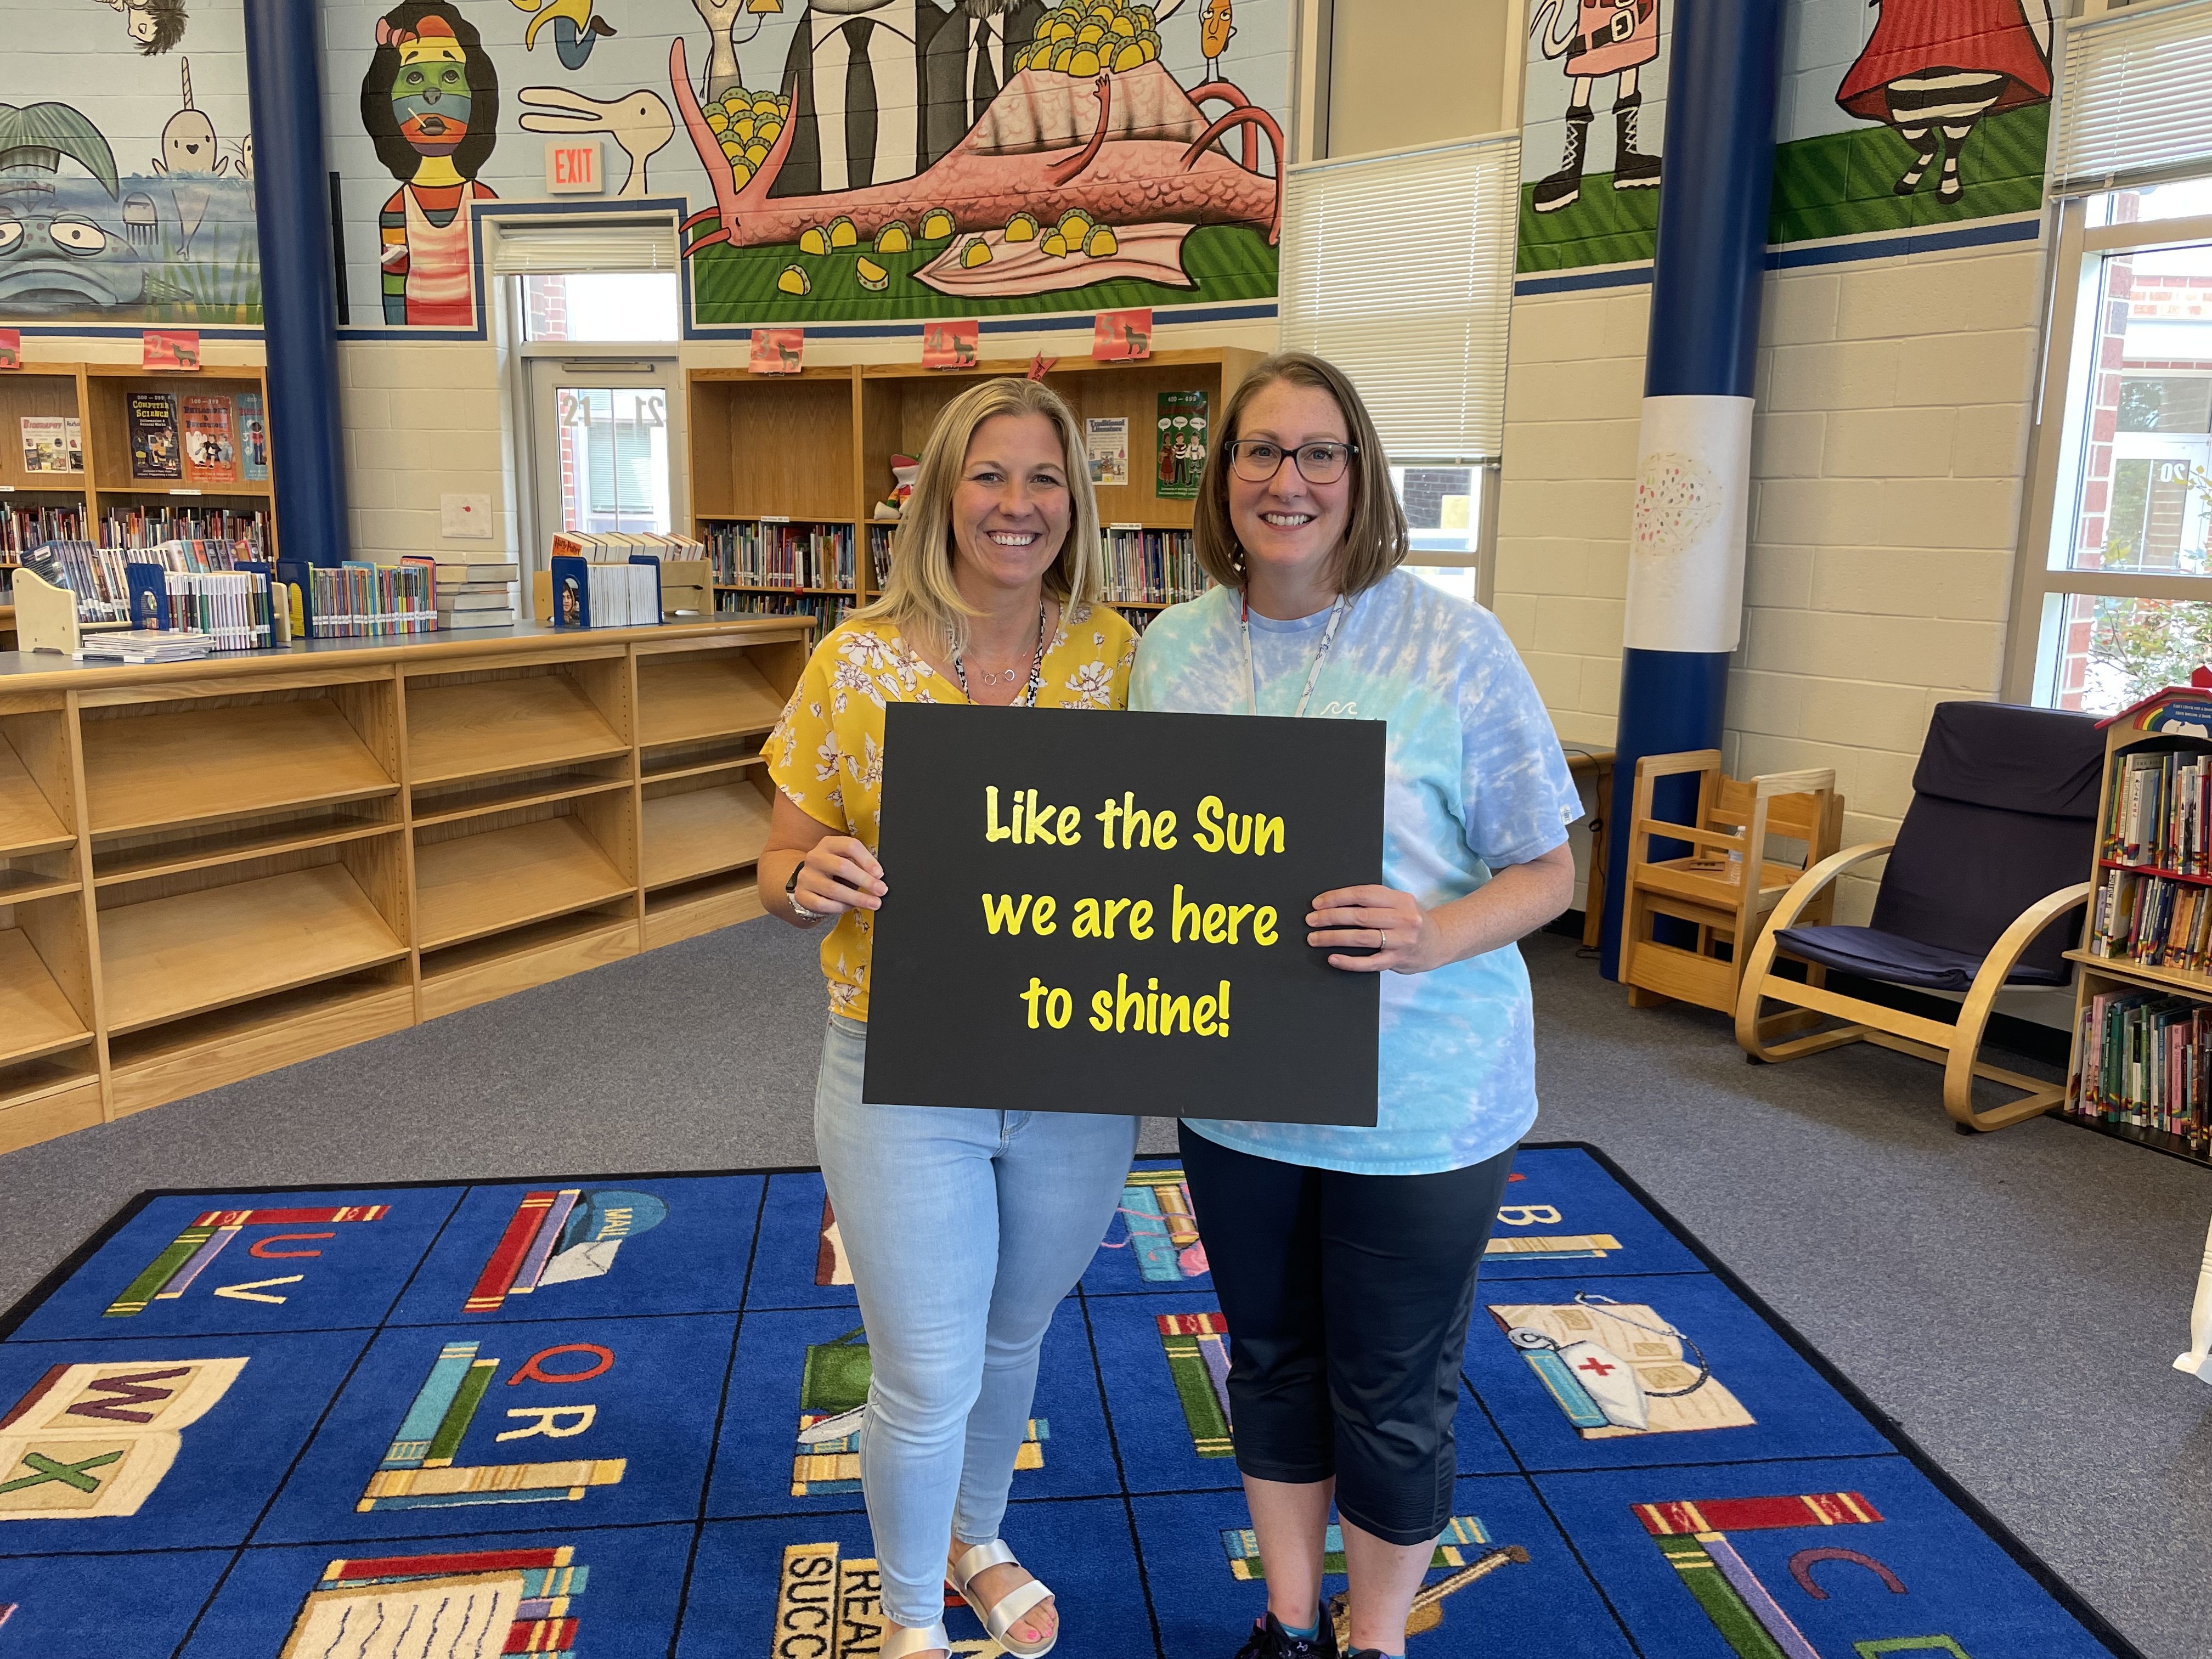 Mrs. Fawley and Mrs. Mack, our Reading Specialists